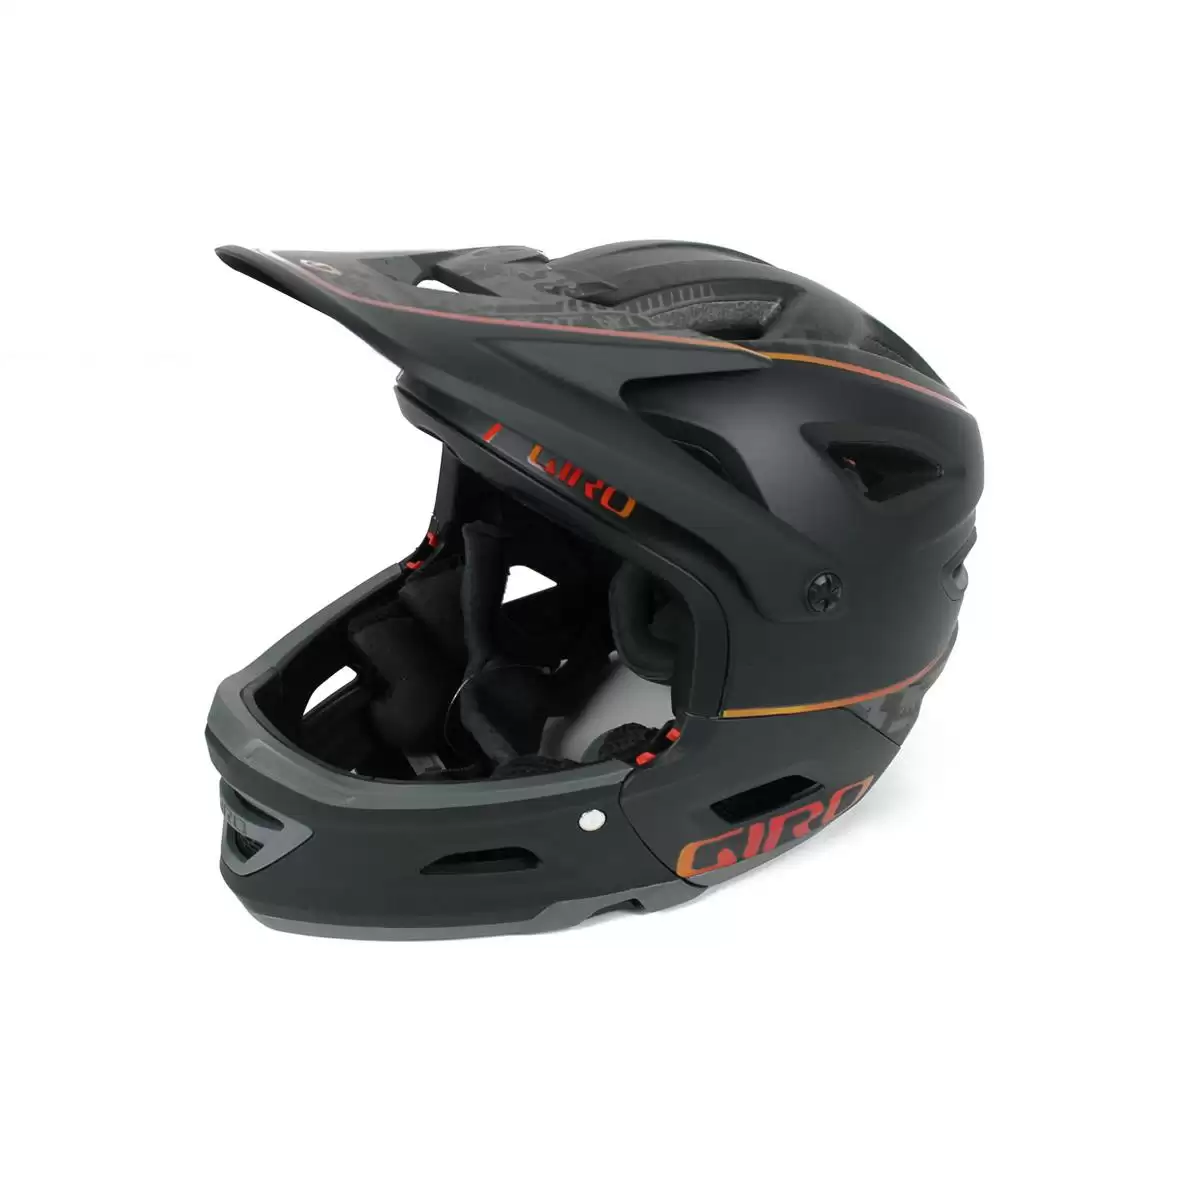 Casque Switchblade Mips noir taille S (51-55cm) - image